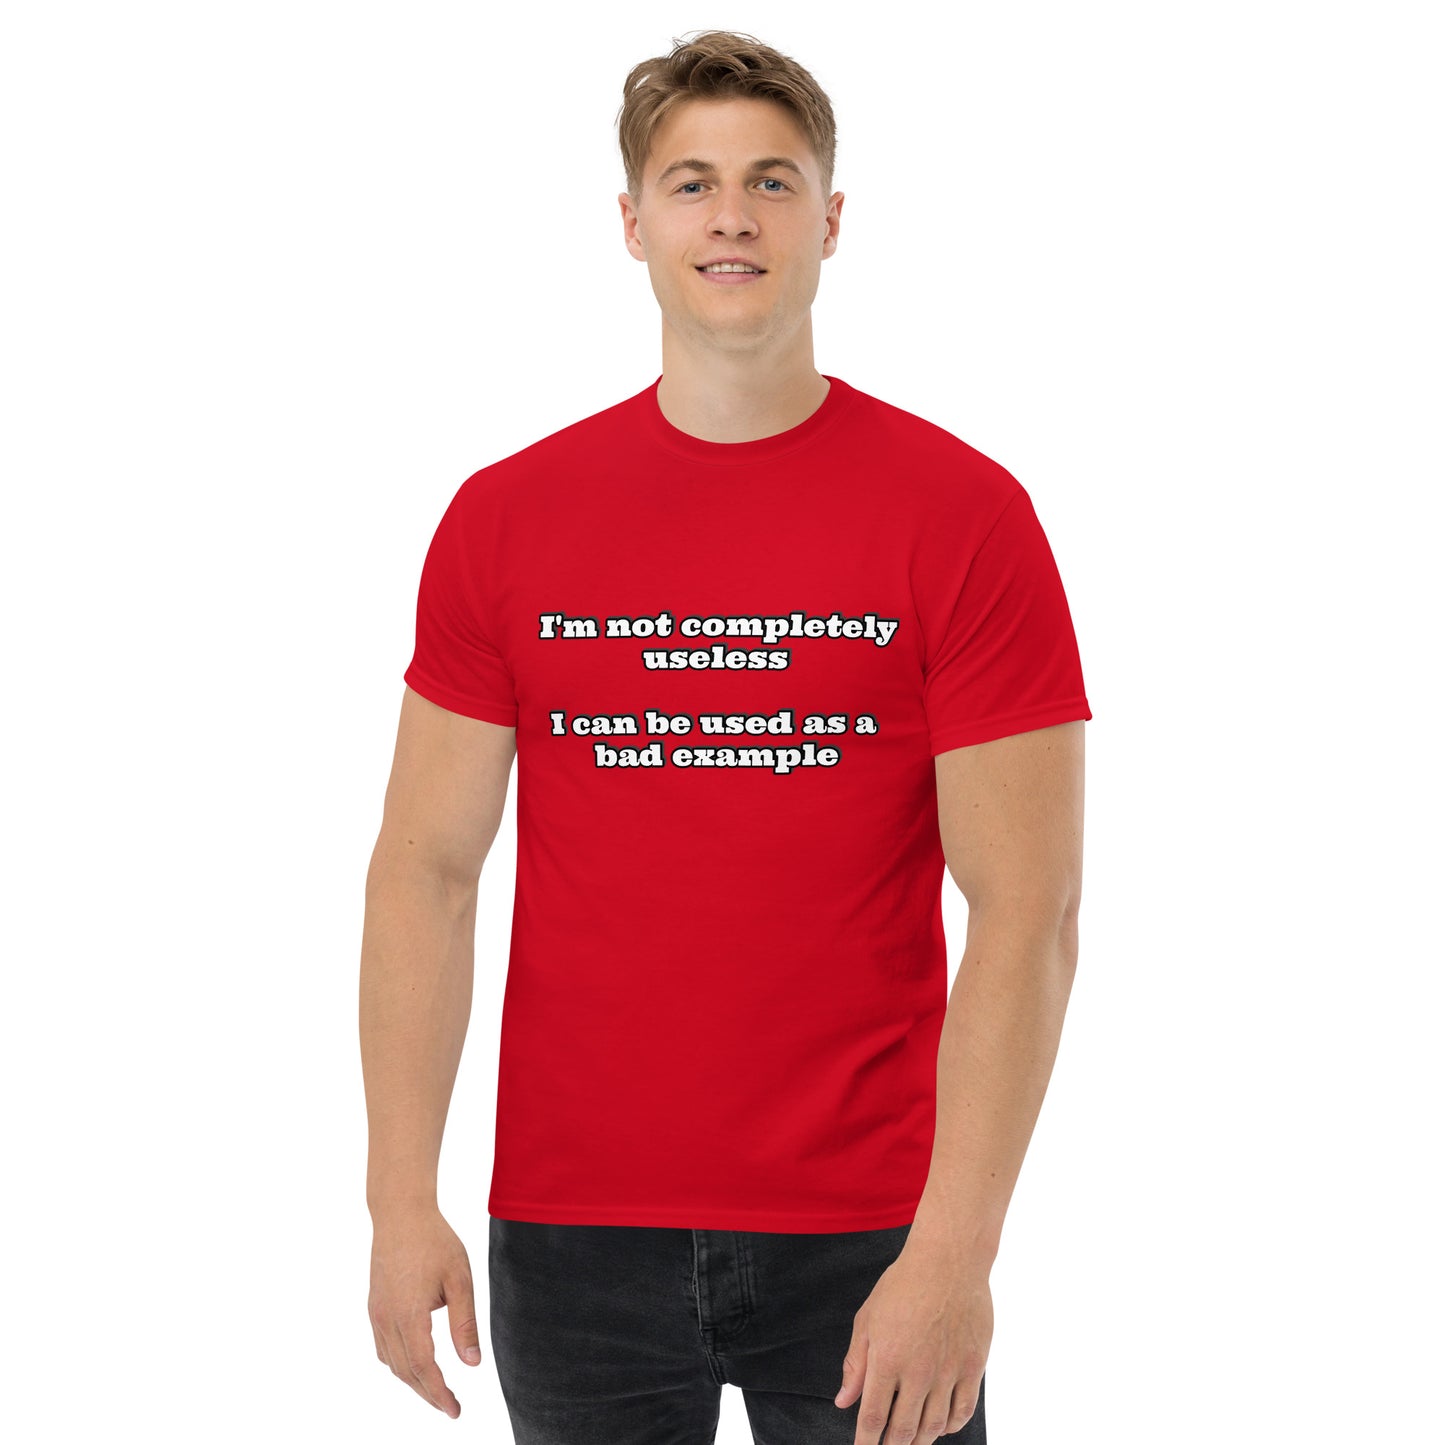 Men with red t-shirt with text “I'm not completely useless I can be used as a bad example”